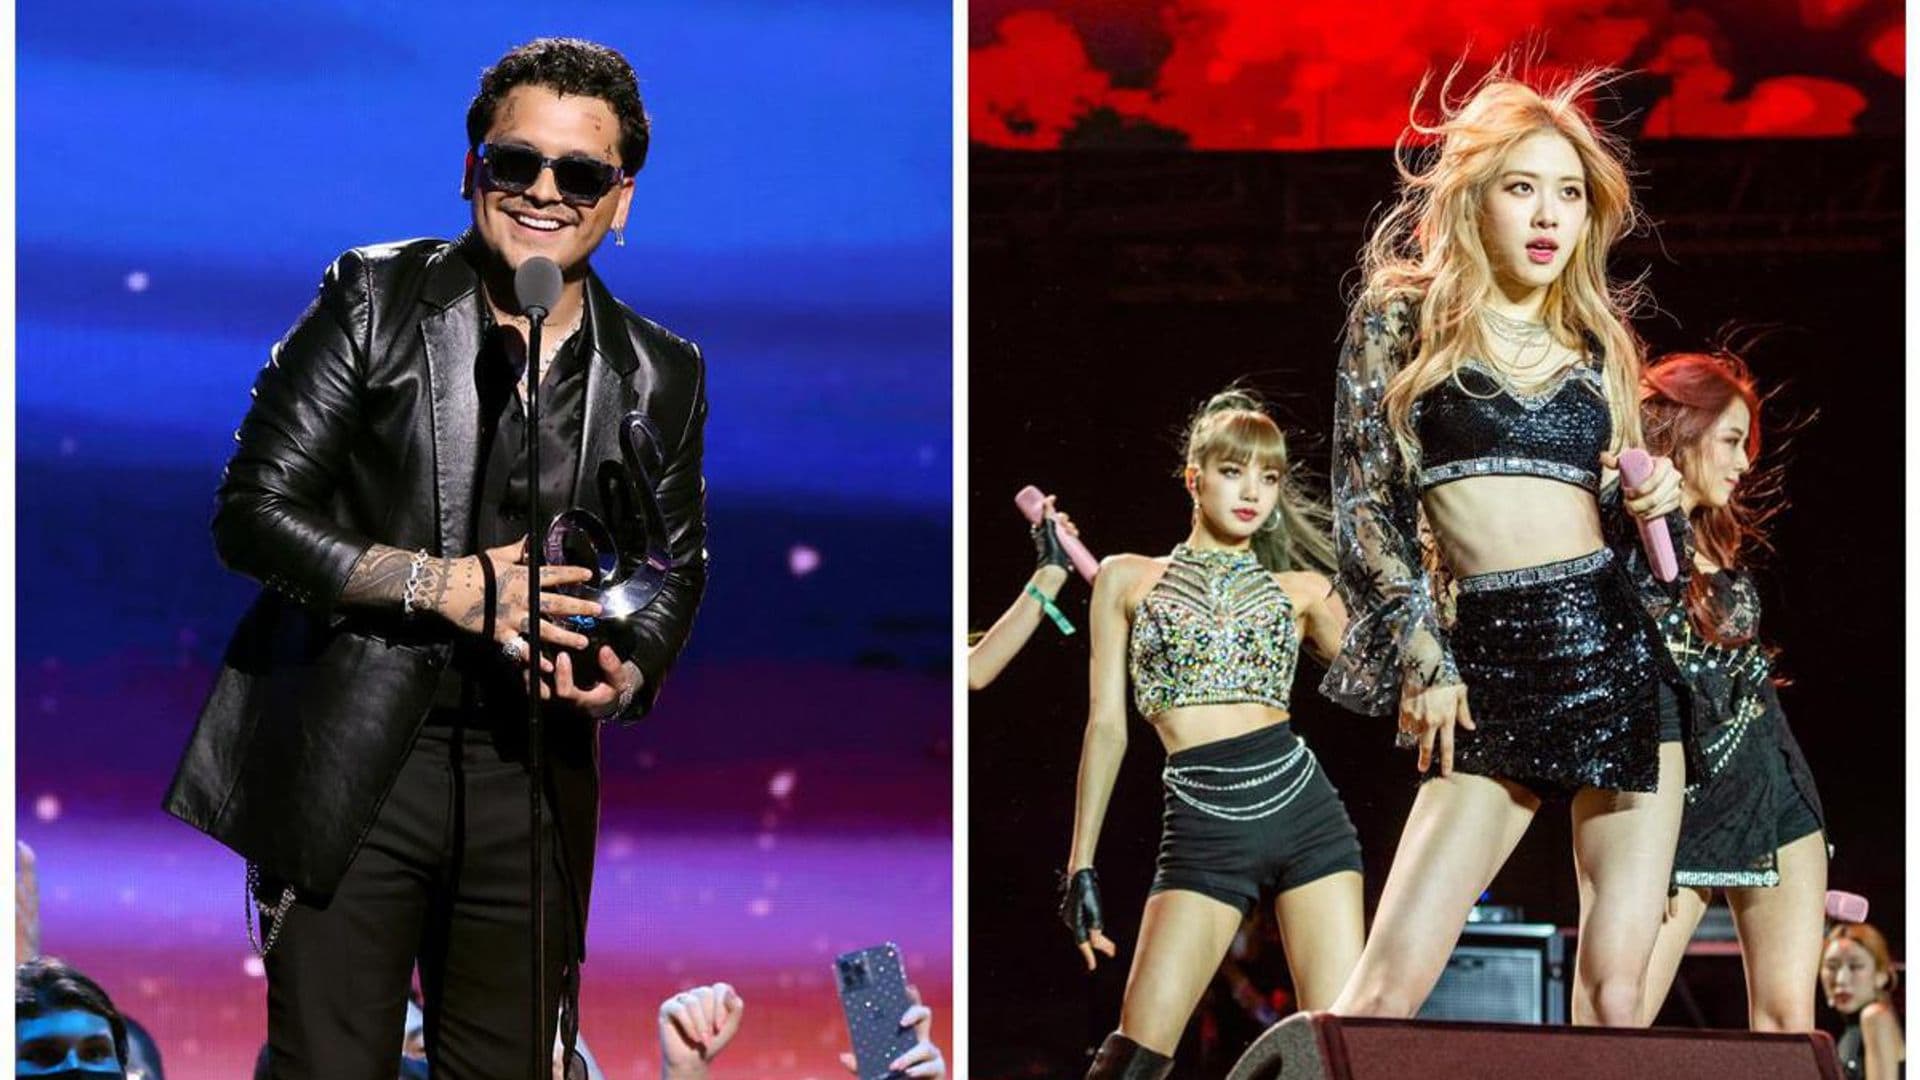 Christian Nodal teases collaborations with K-pop girl groups BLACKPINK & MOMOLAND